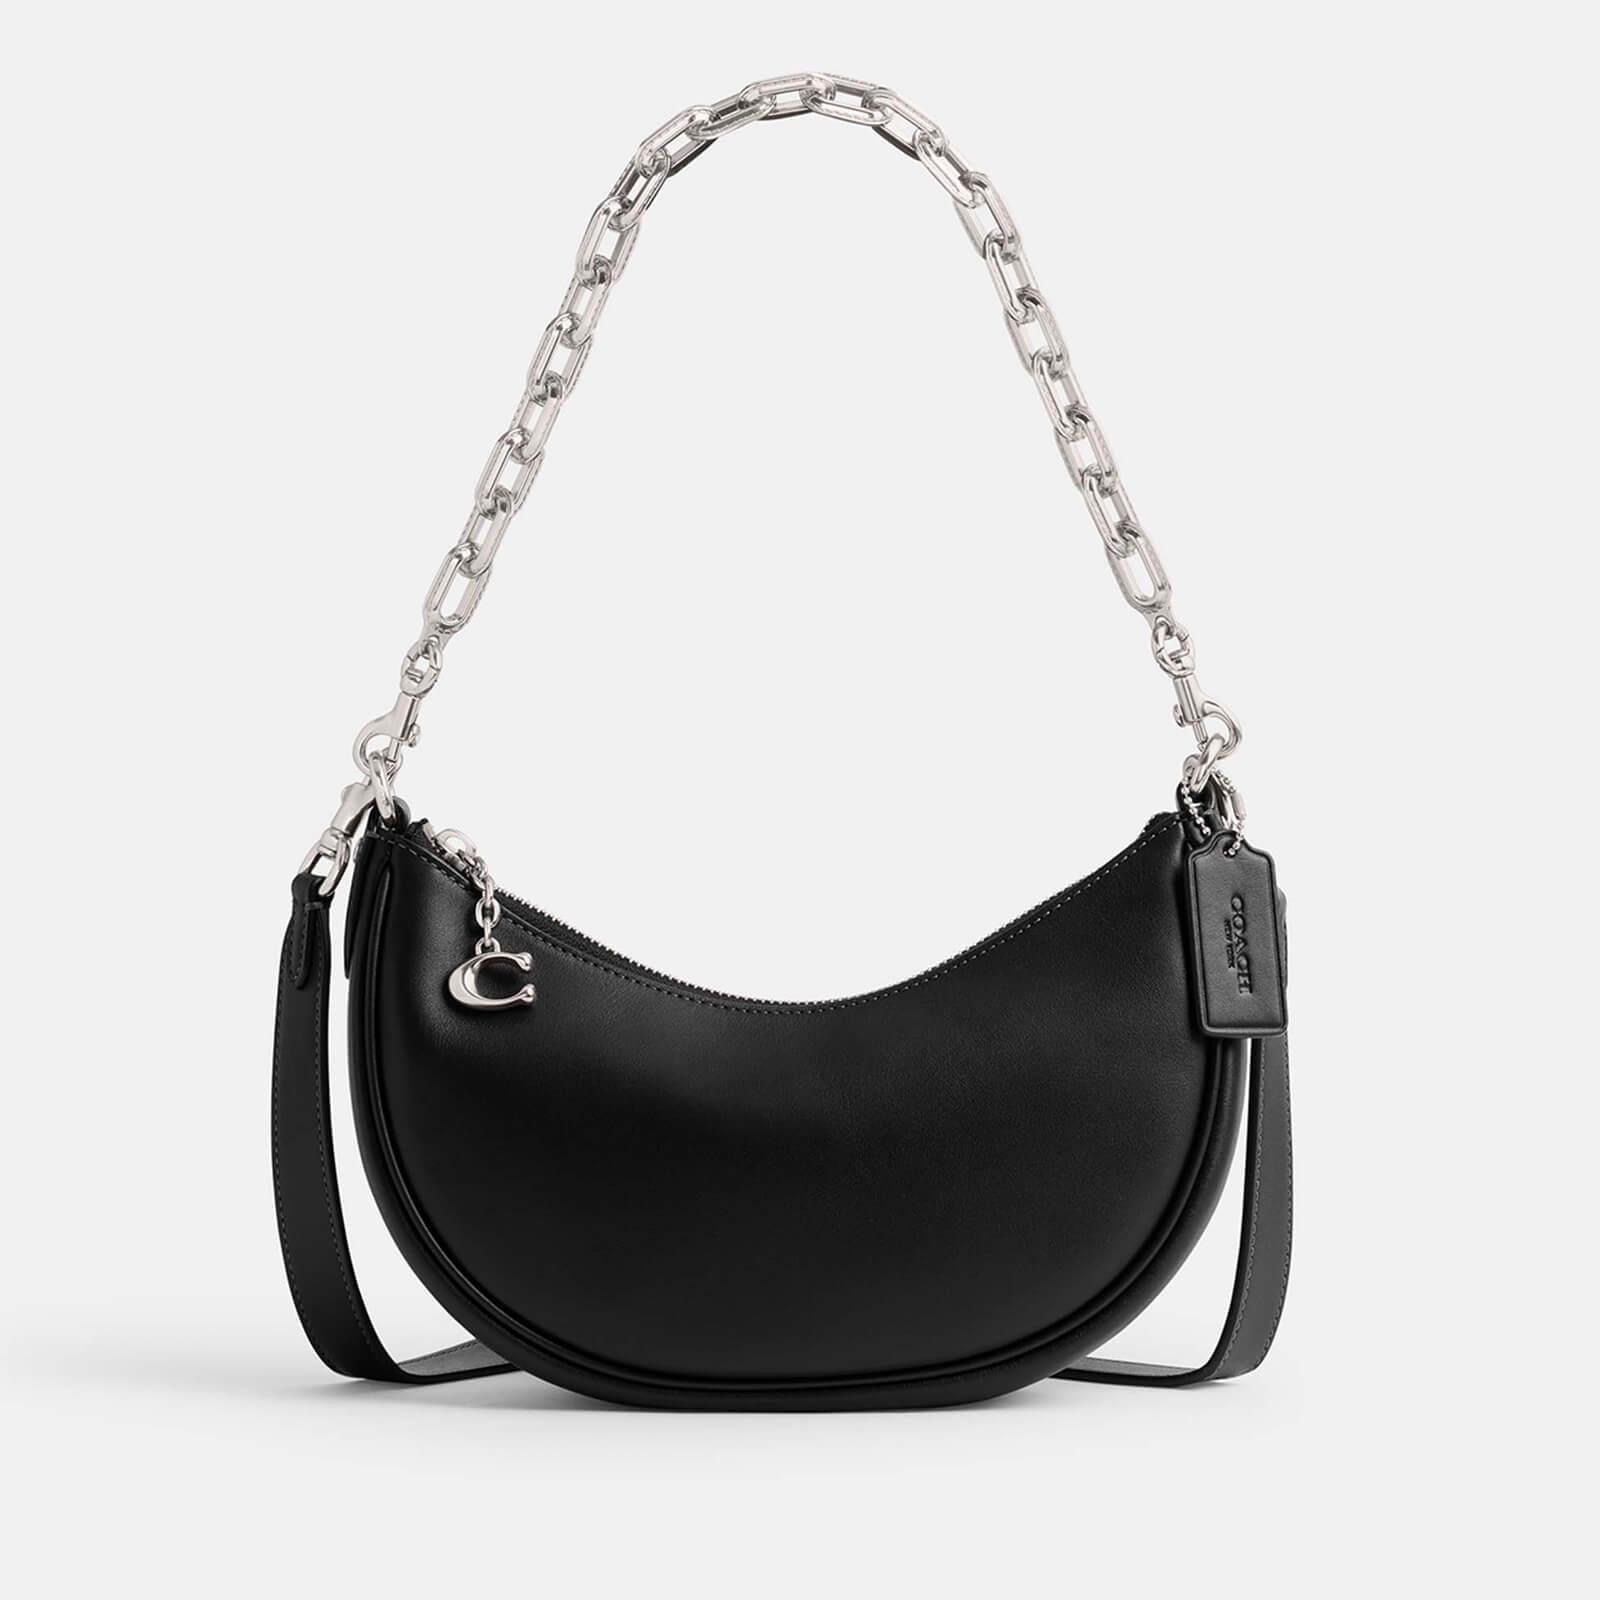 COACH Mira Crescent Glove Tanned Leather Shoulder Bag With Chain in Black